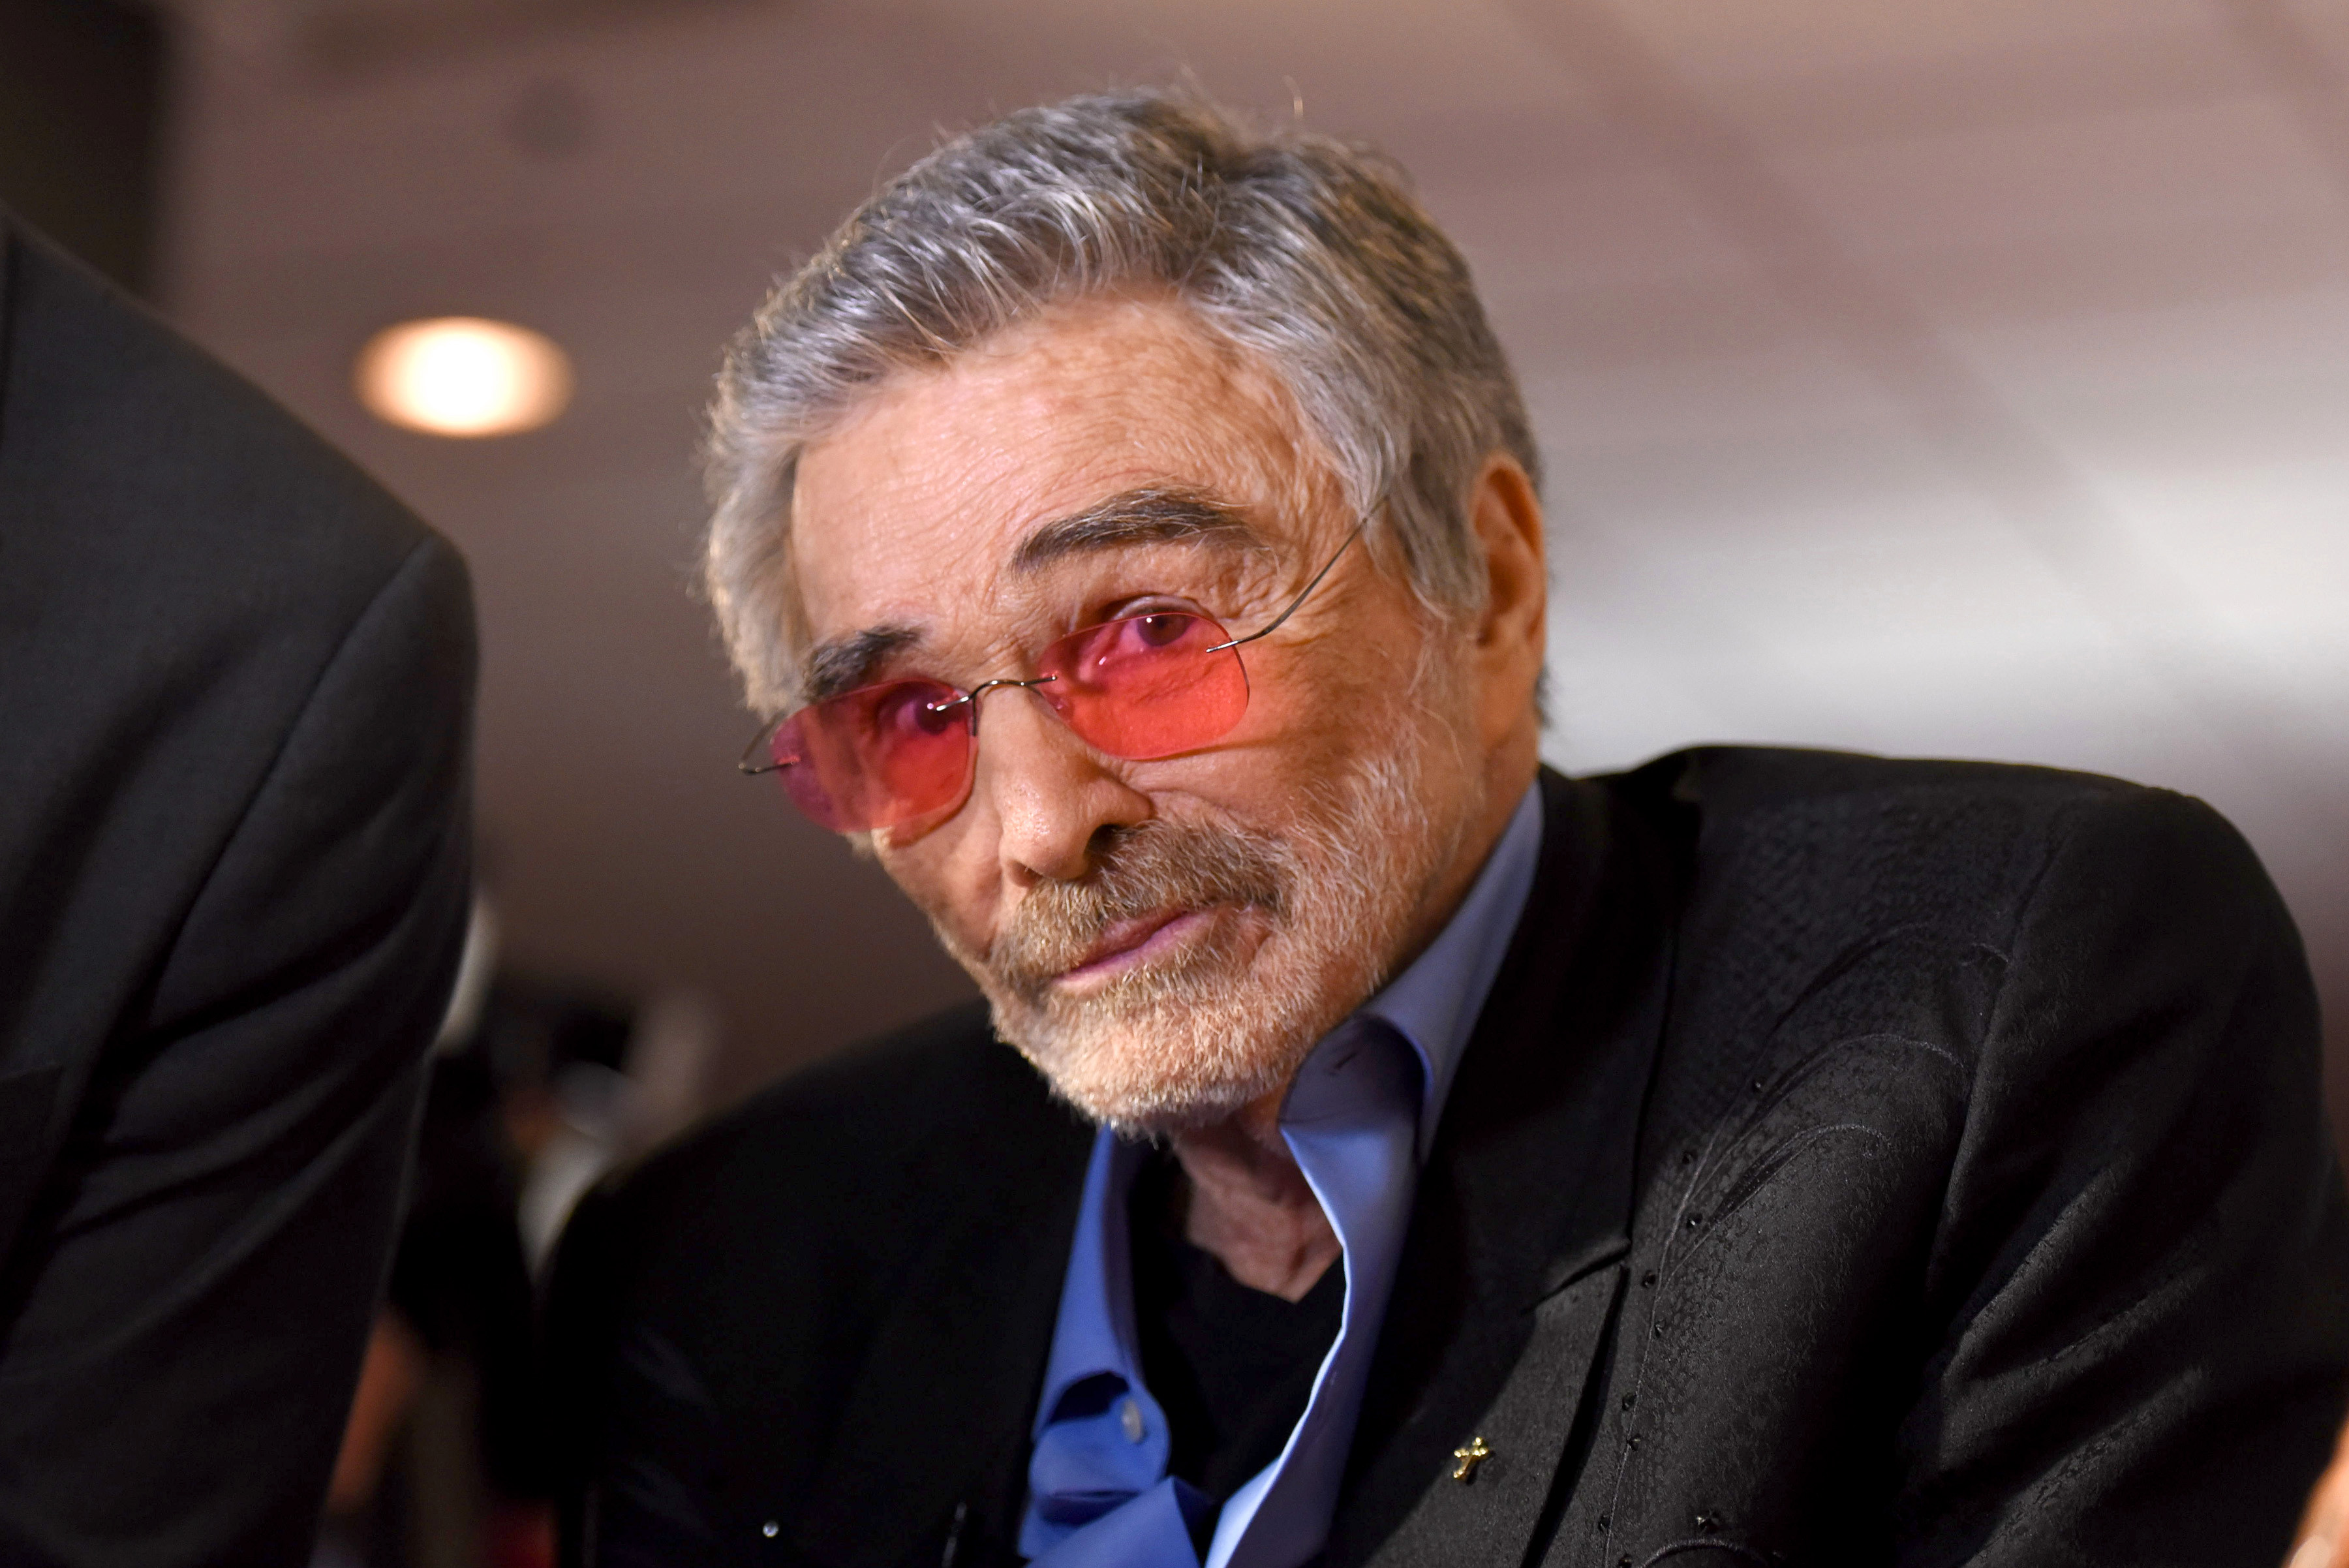 Burt Reynolds laid to rest at Hollywood Forever Cemetery over two years after his death